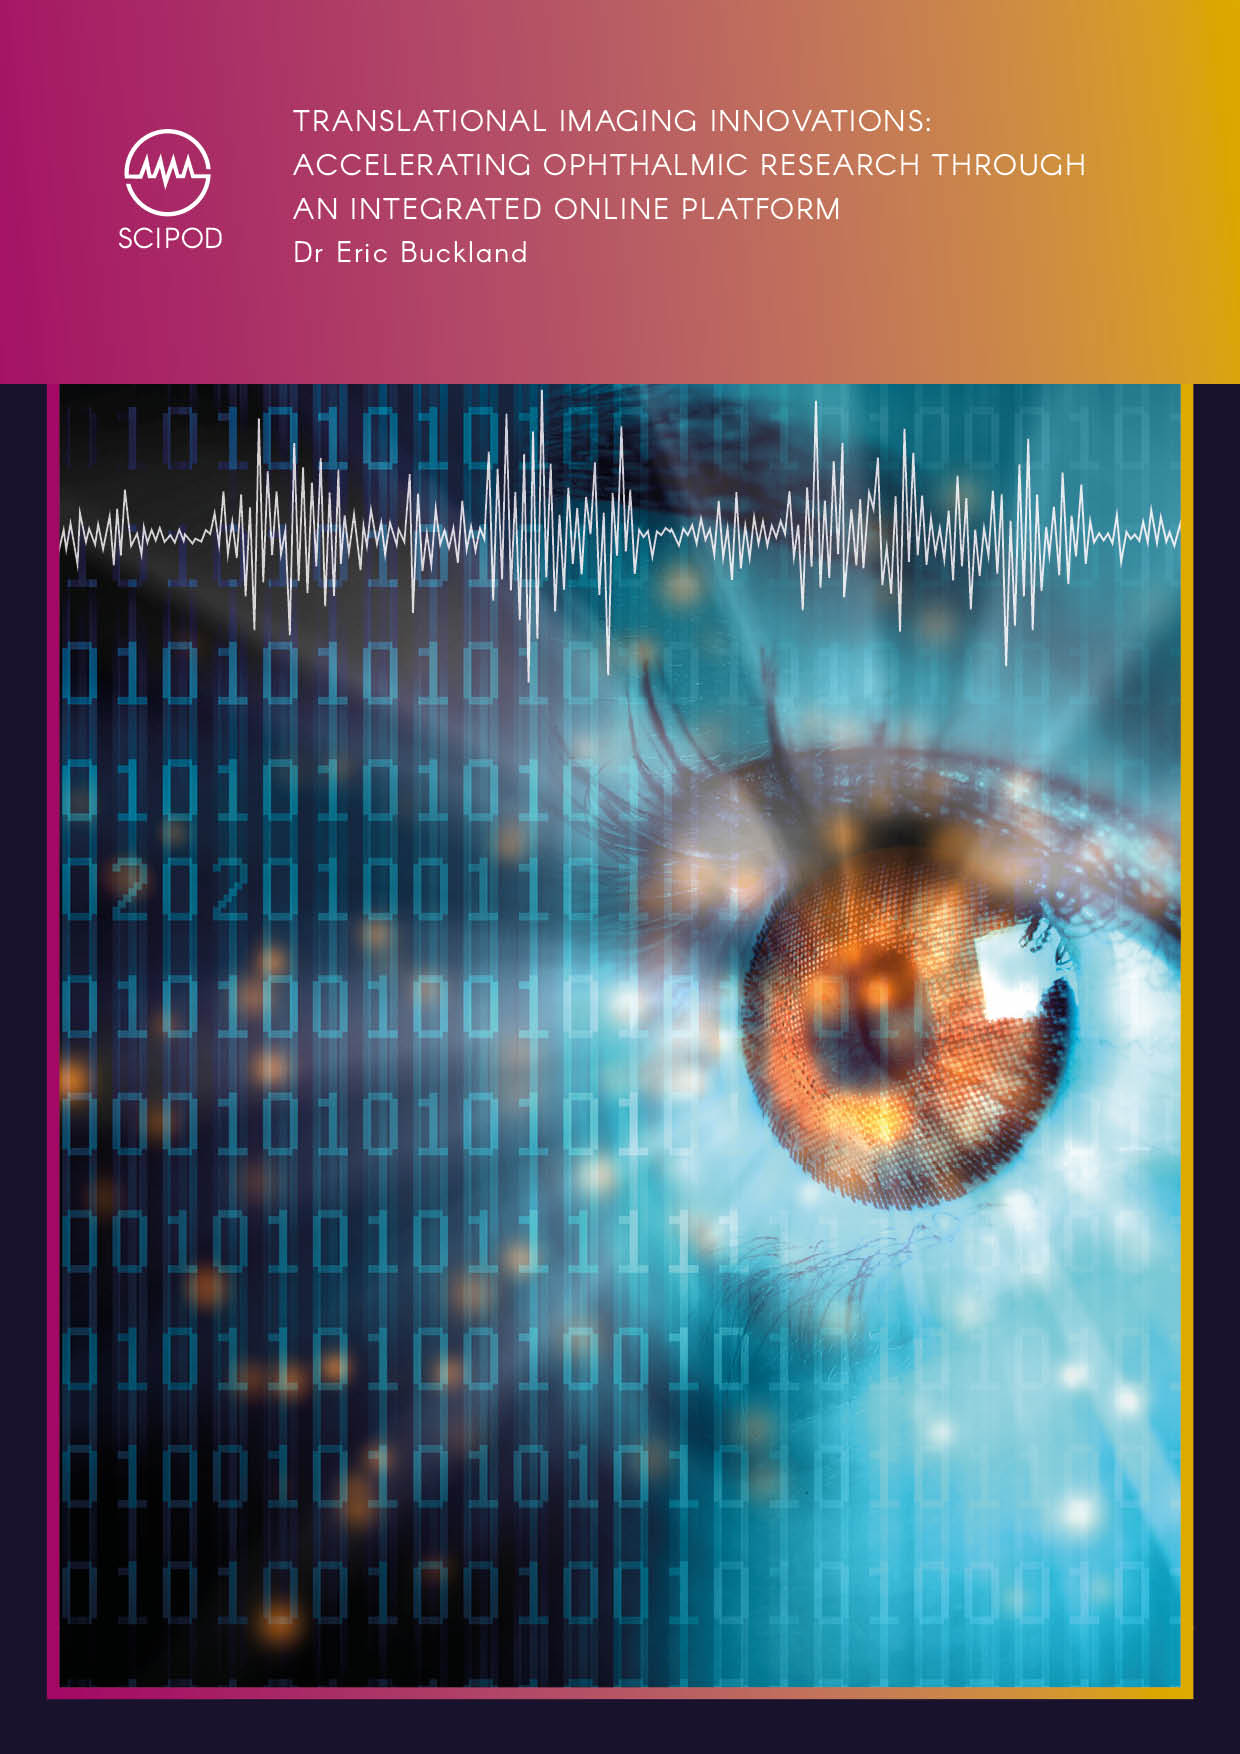 Translational Imaging Innovations: Accelerating Ophthalmic Research Through an Integrated Online Platform